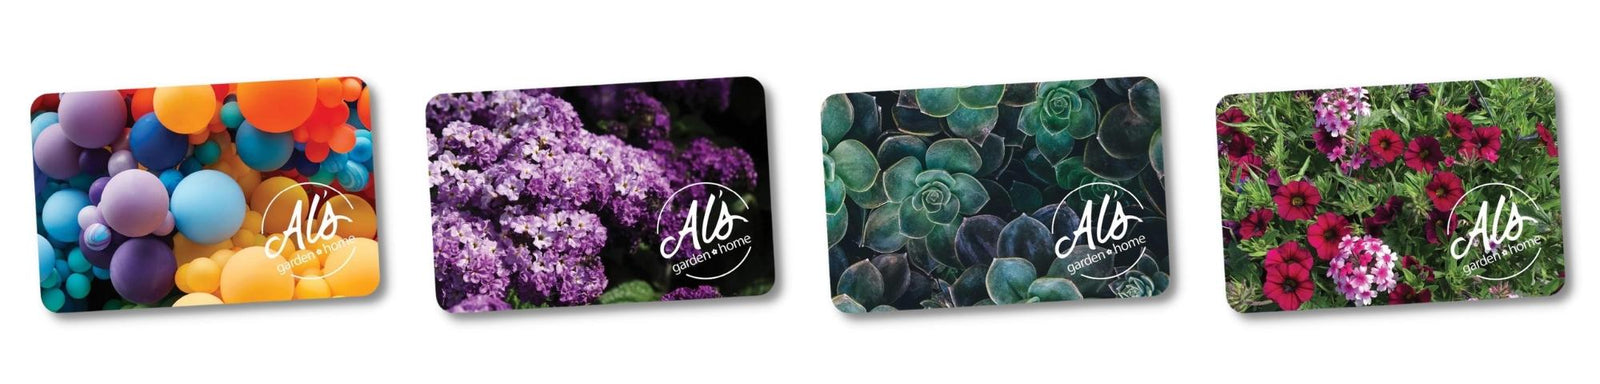 Al's Garden and Home Gift Cards